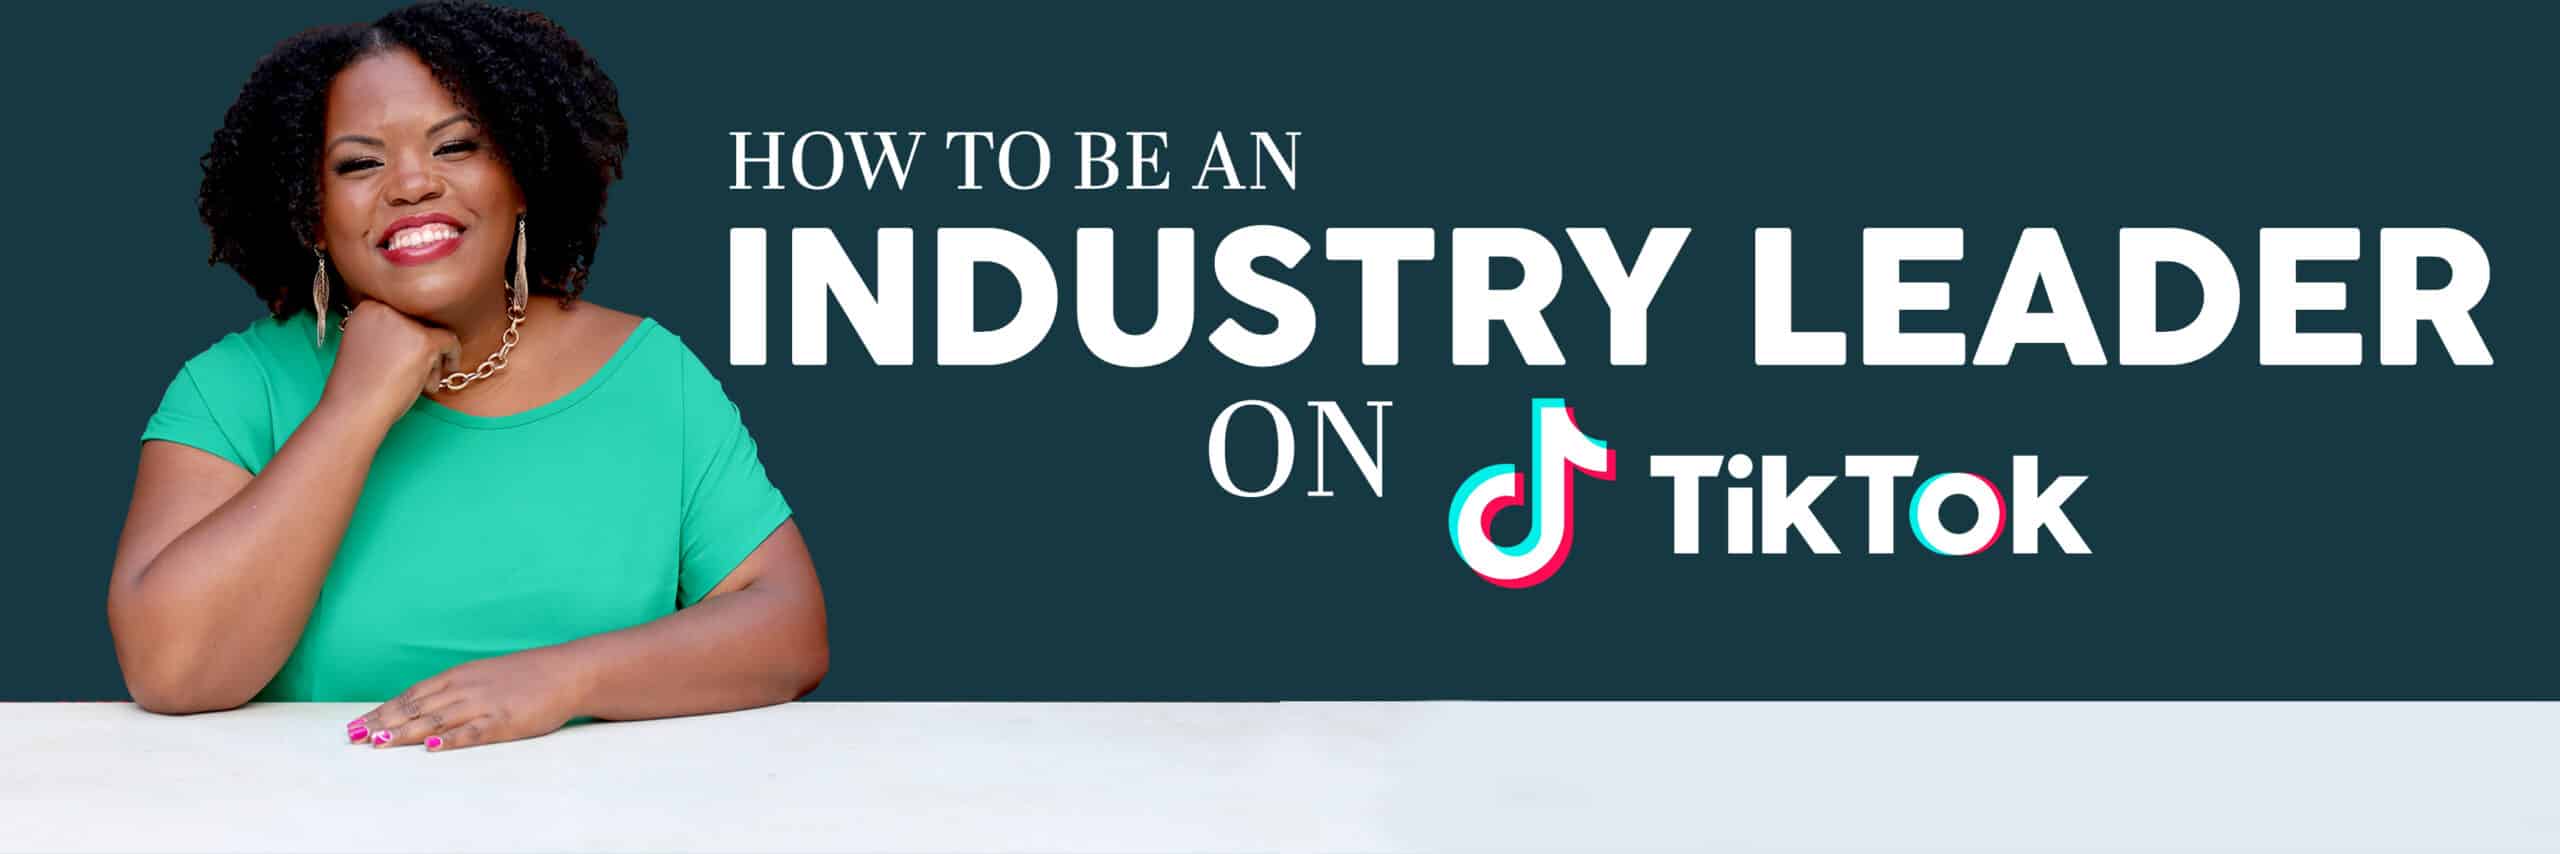 How To Be An Industry Leader on TikTok